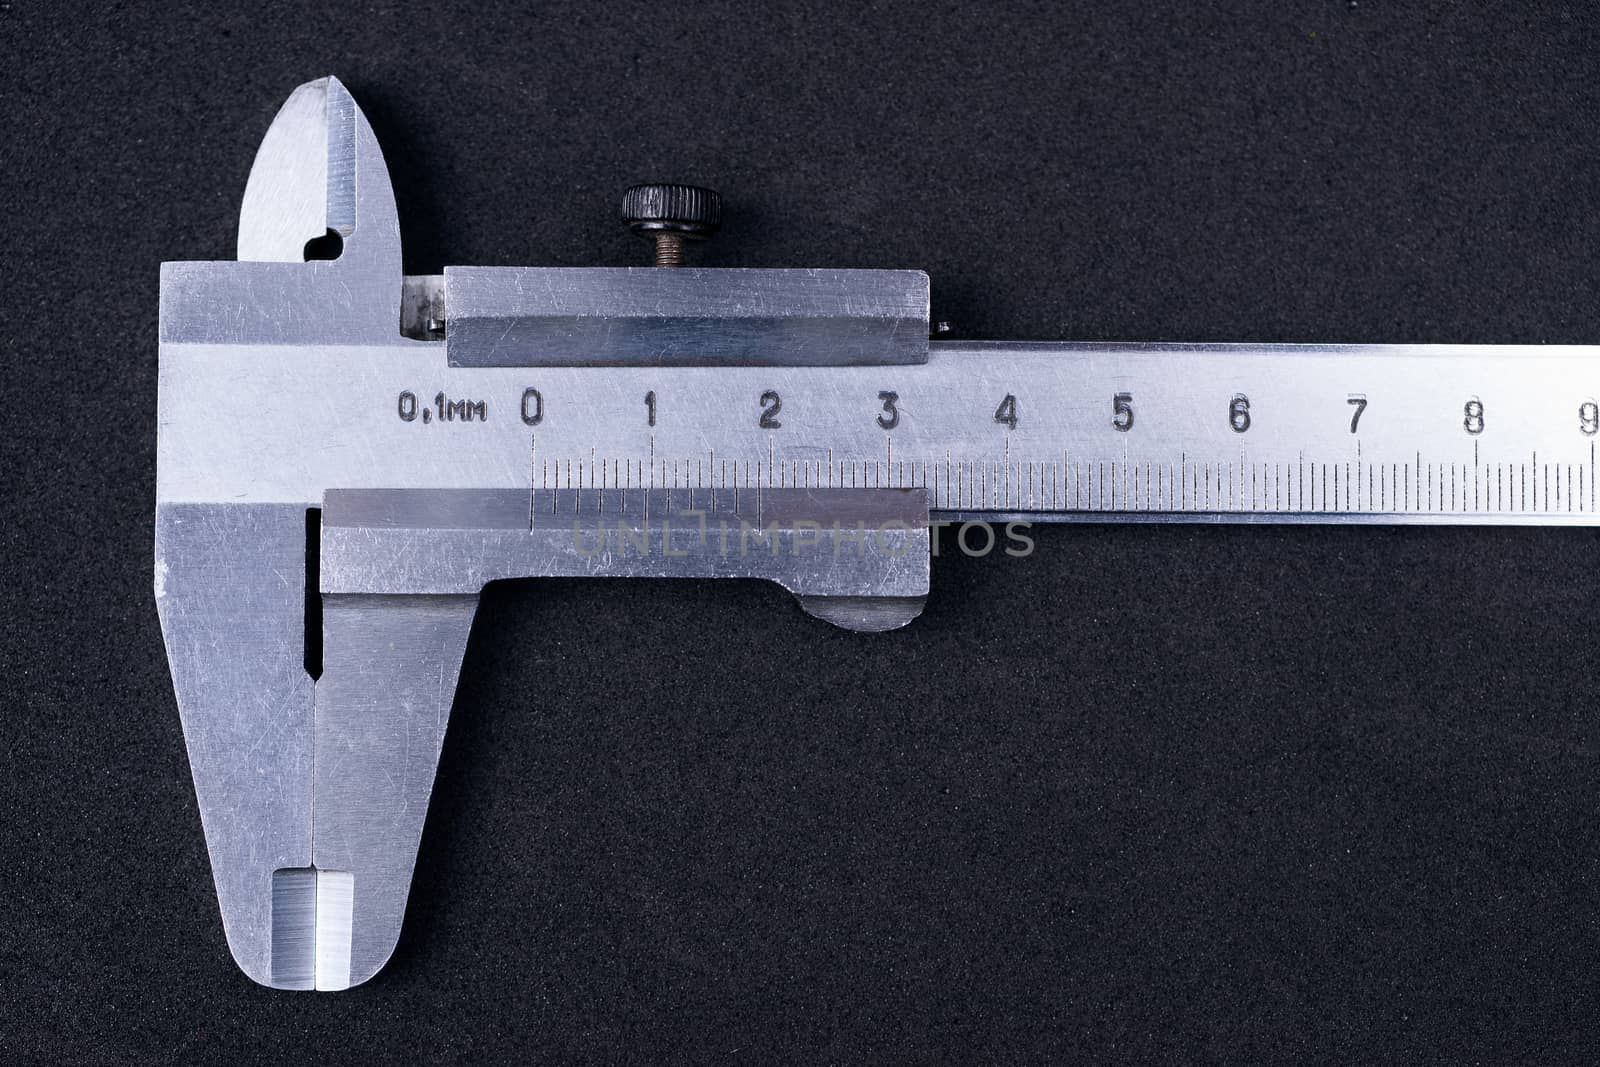 Vintage steel caliper tool closeup. Caliper in very good condition. Scale in metric units, milimeter step. Stock photo isolated on gray background.